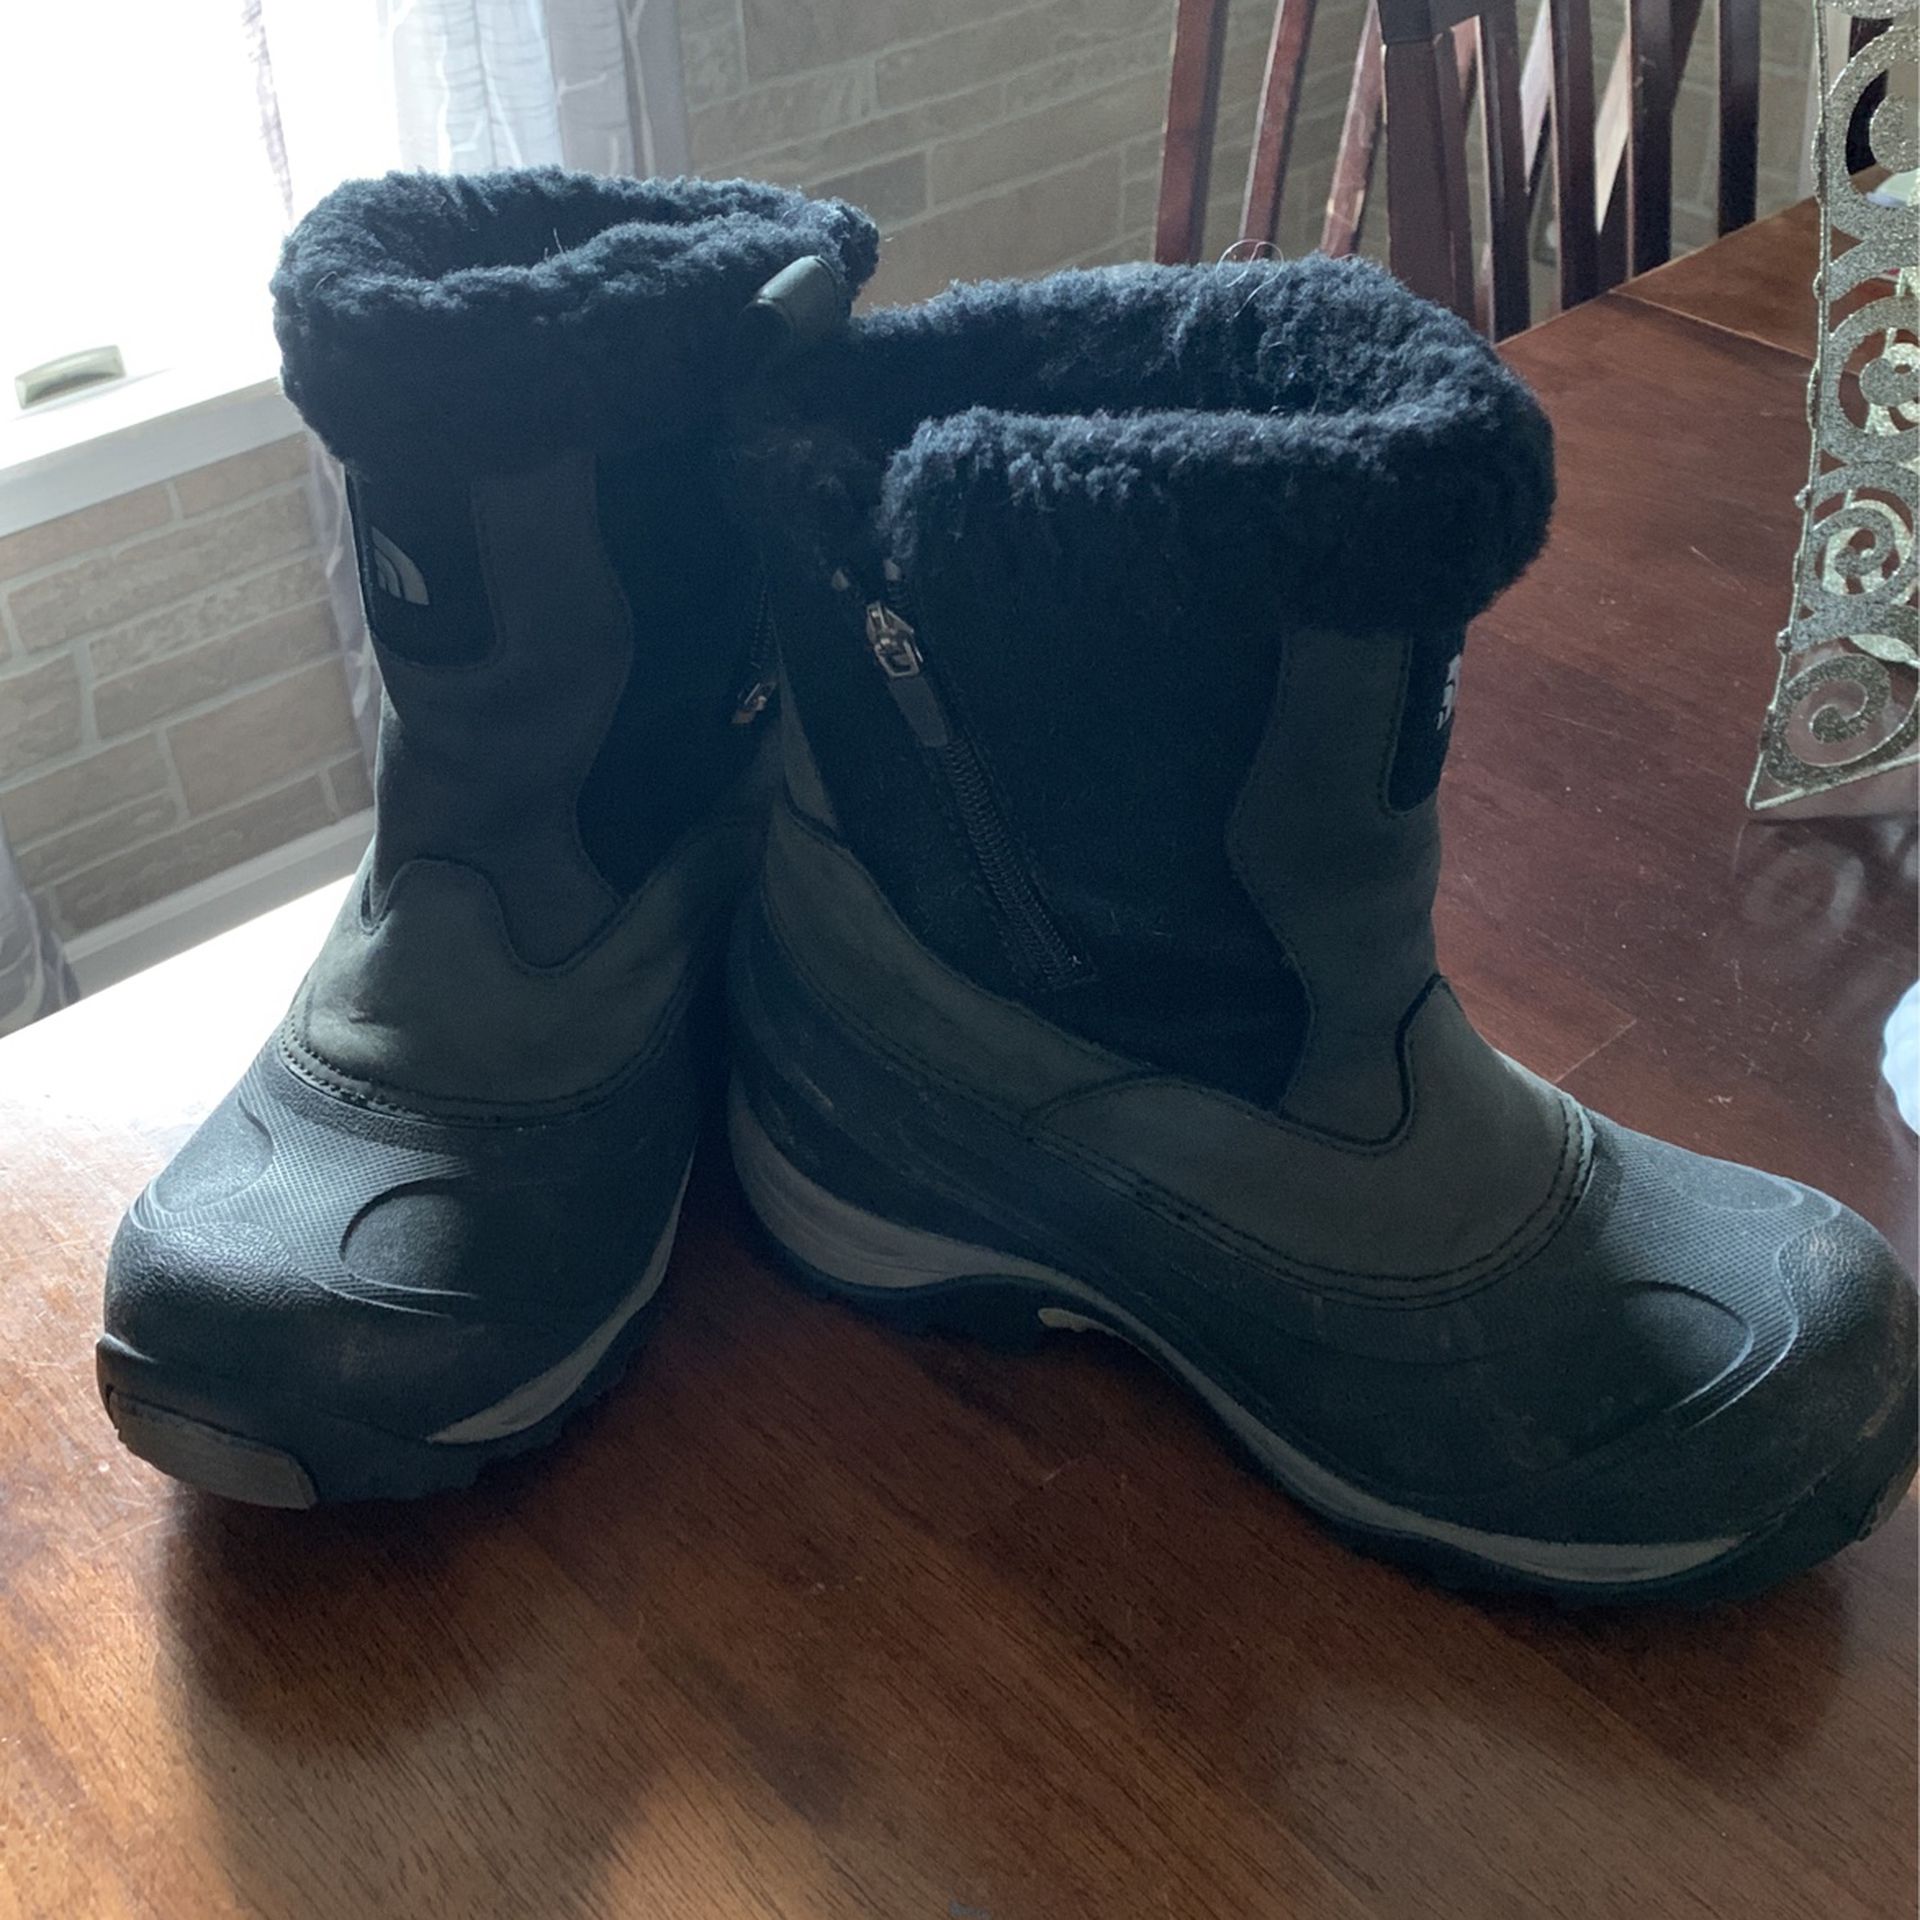 Women's North Face Snow Boots (7.5)